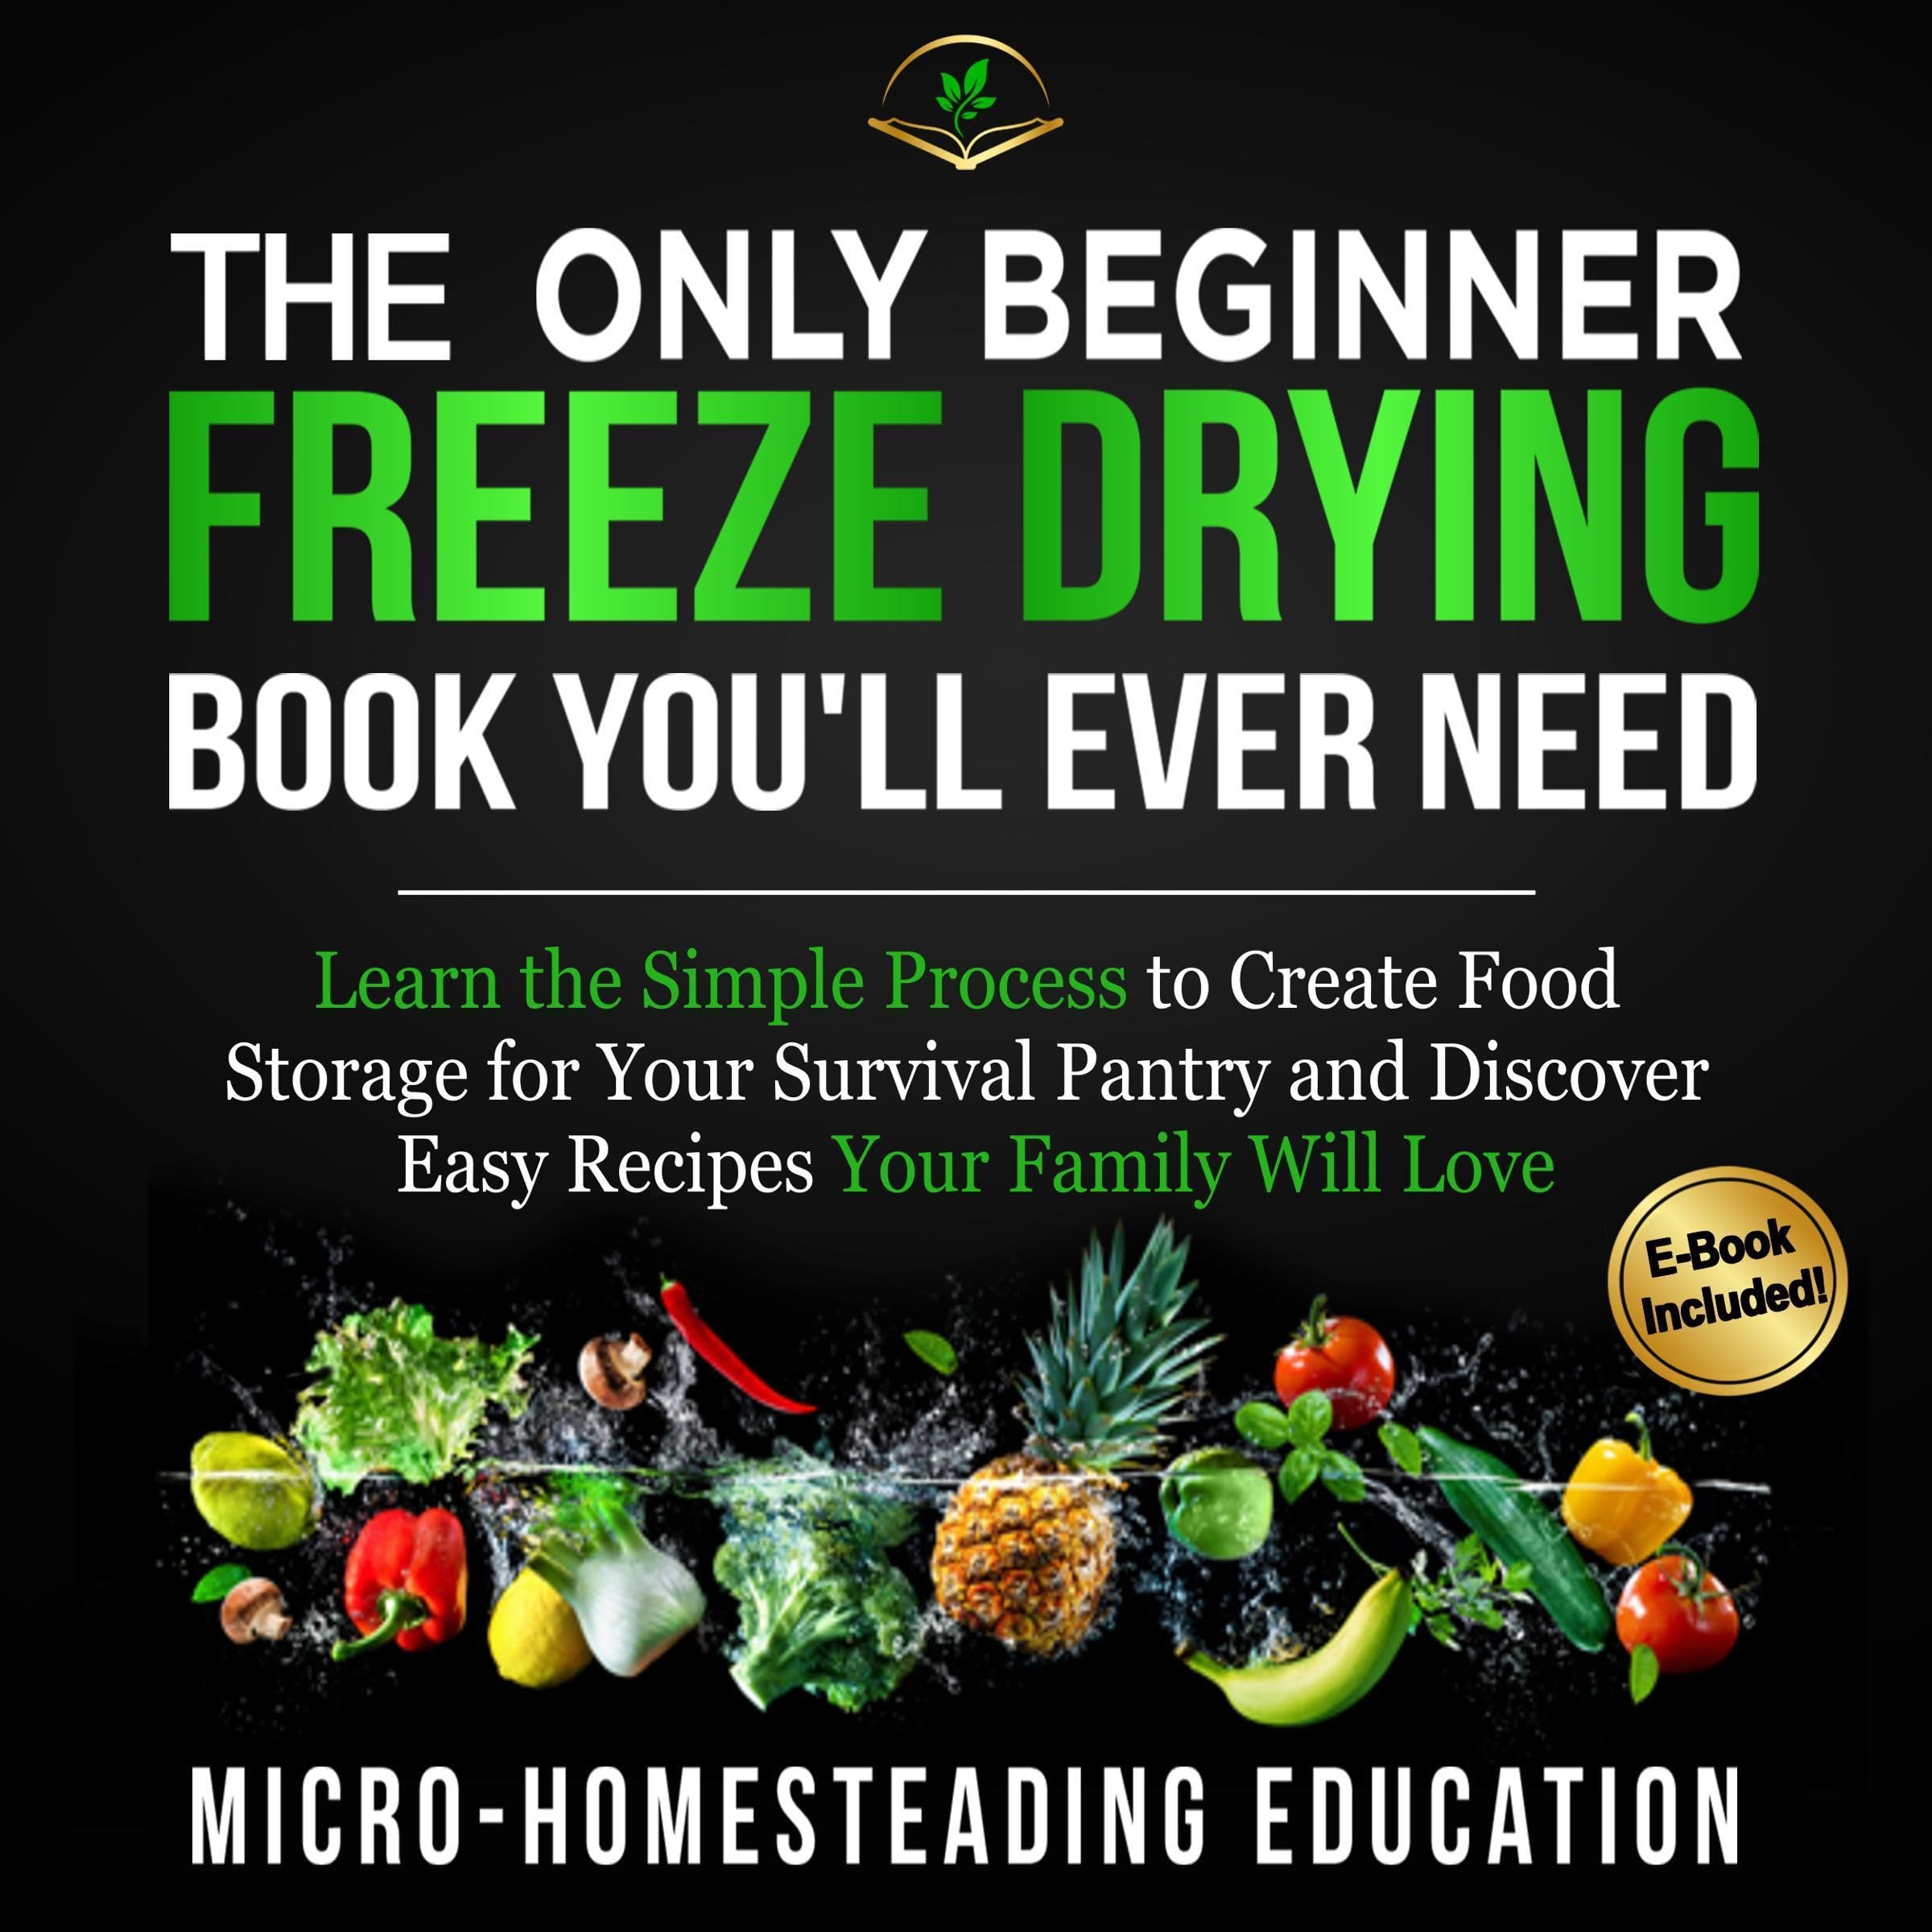 The Only Beginner Freeze Drying Book You'll Ever Need: Learn the Simple Process to Create Food Storage for Your Survival Pantry and Discover Easy Recipes Your Family Will Love